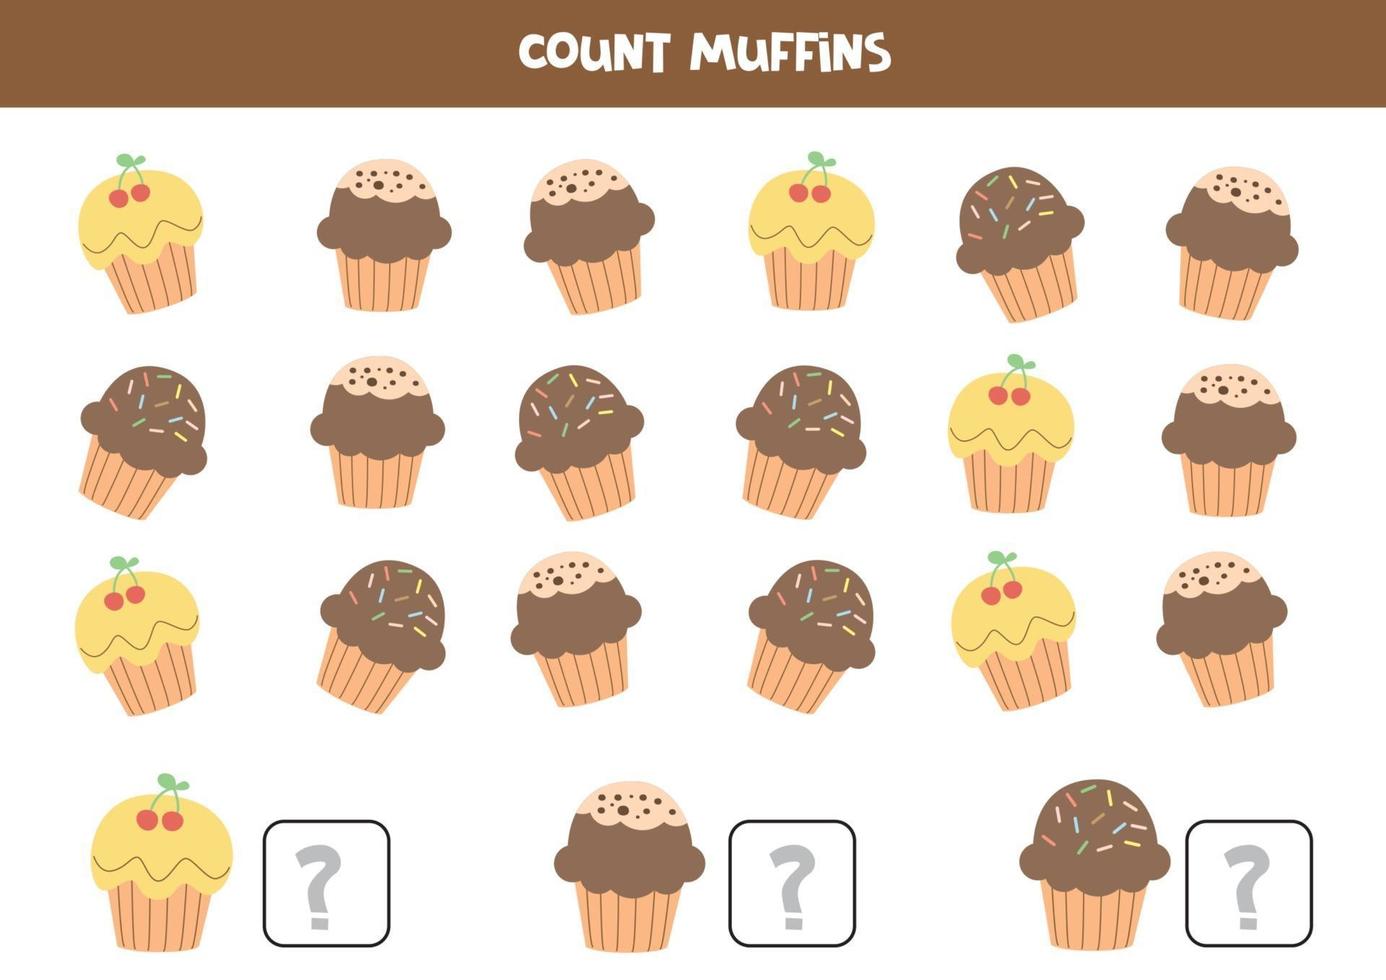 Educational worksheet for kids. Count each muffin. Math game for kids. vector